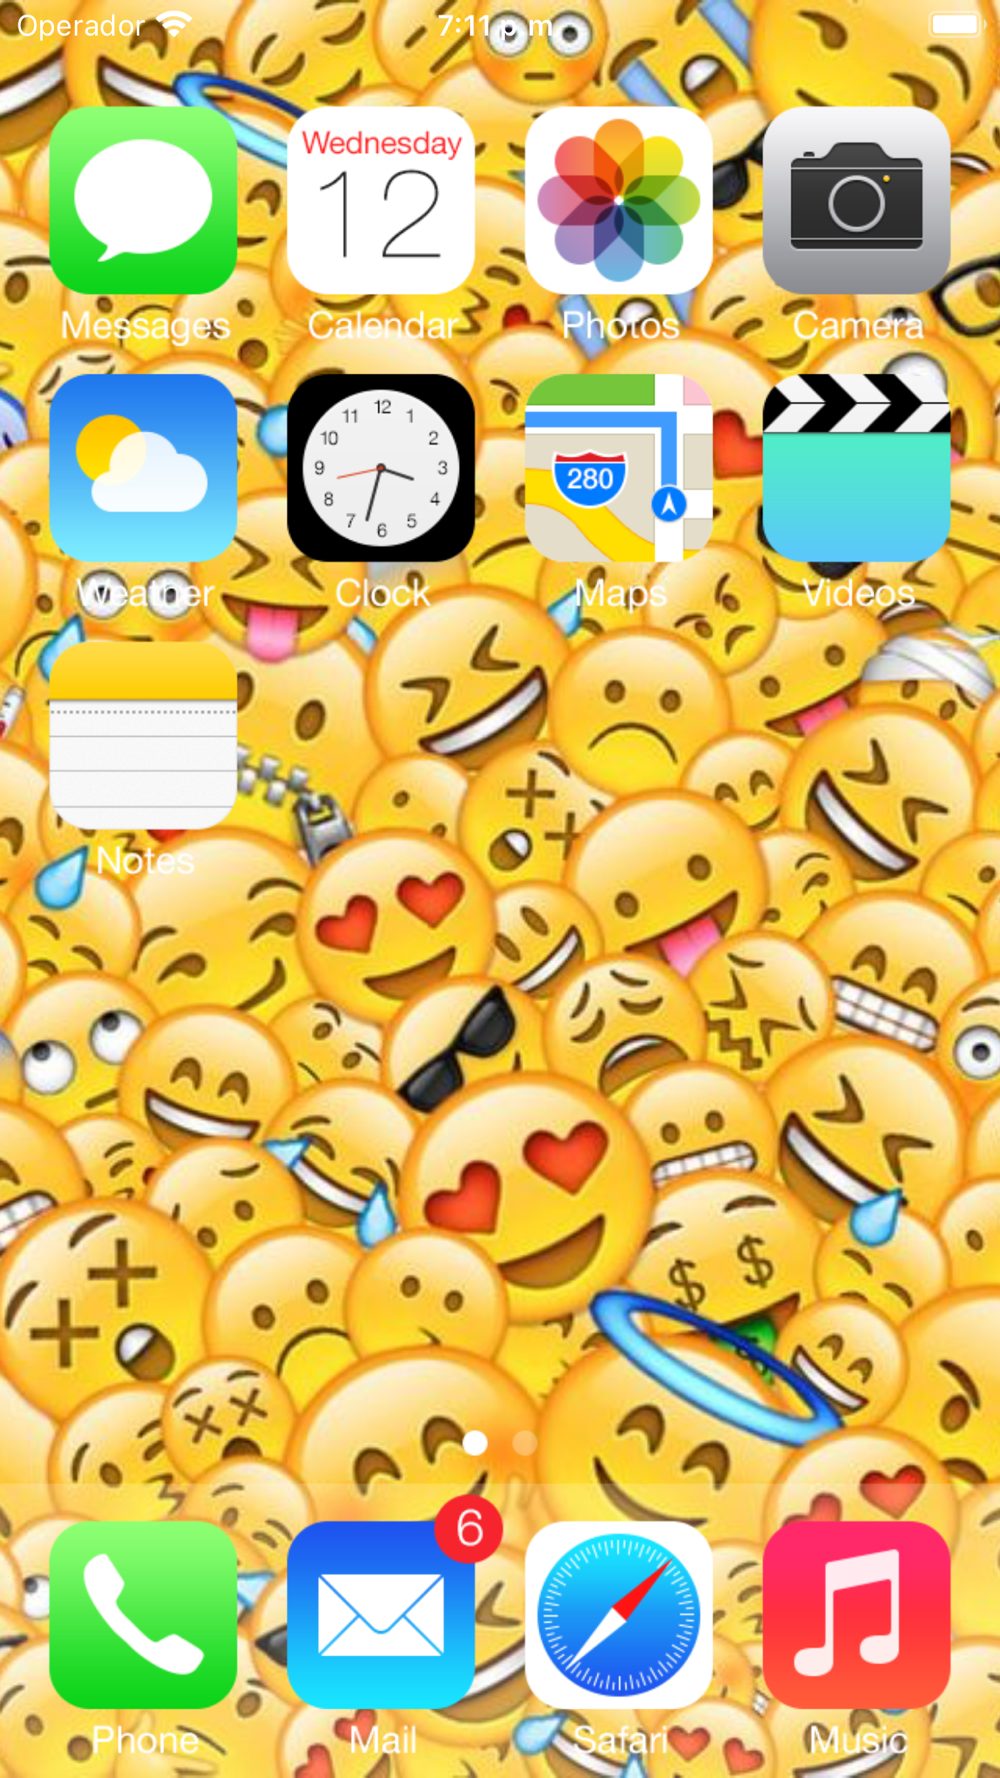 Funny Sad Emojis wallpapers Free Download App for iPhone 